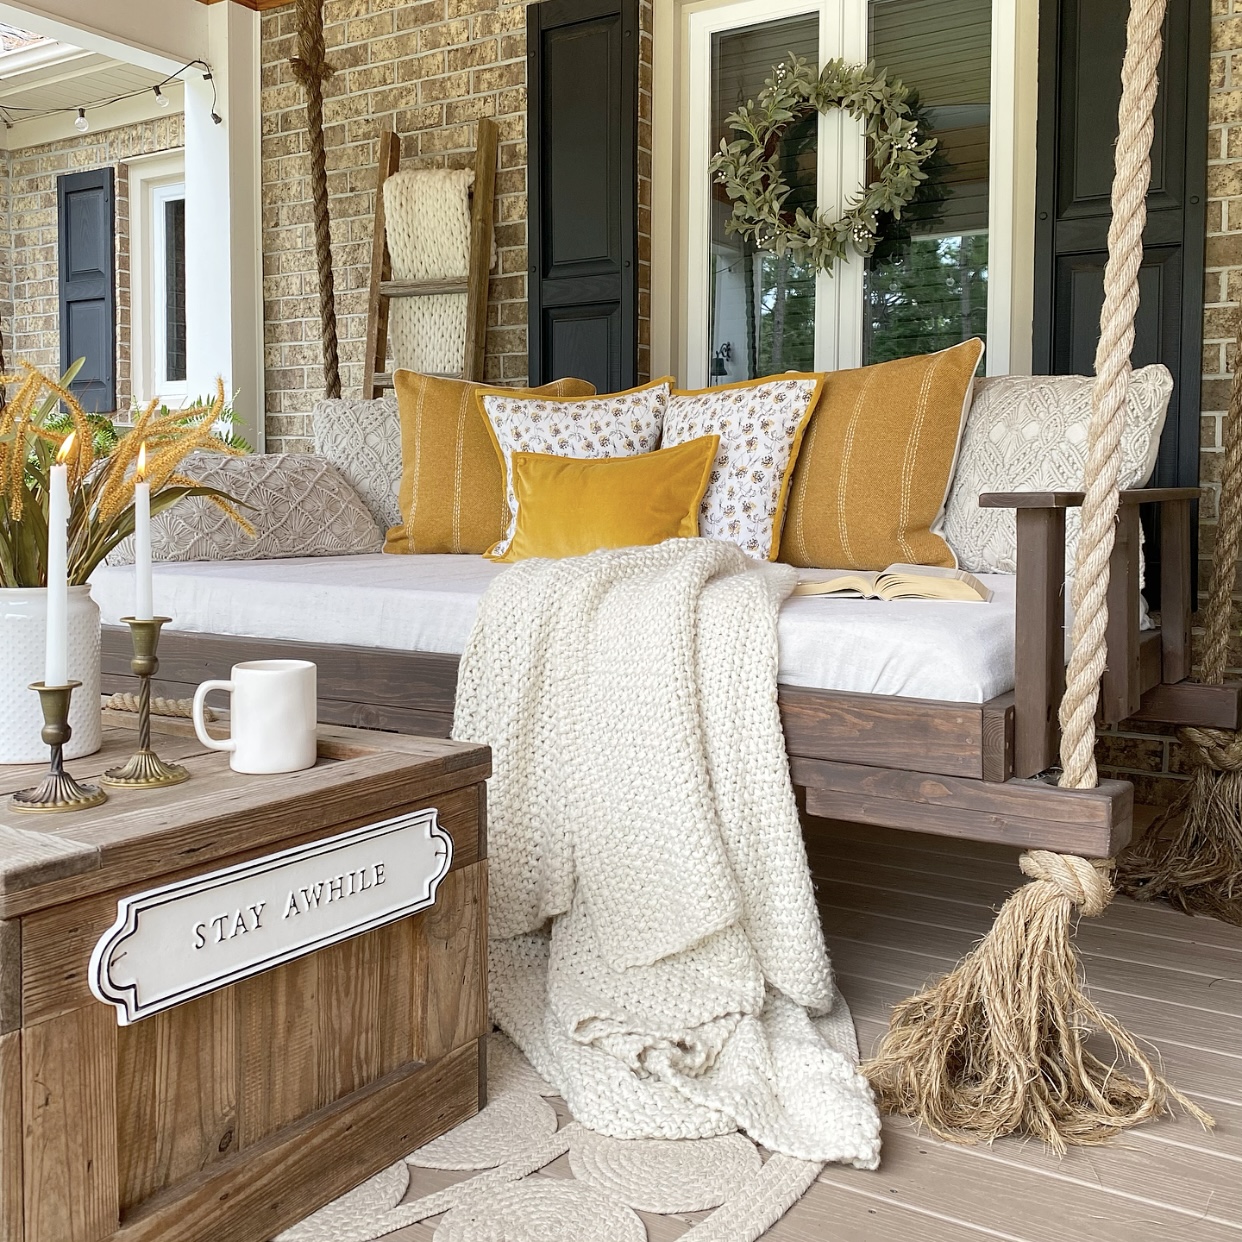 Farmhouse front porch swing with muted gold and cream throw pillows and a blanket on it. In front of the swing is a wood chest coffee table with a mug, brass candlesticks and a crock with fall stems in it.